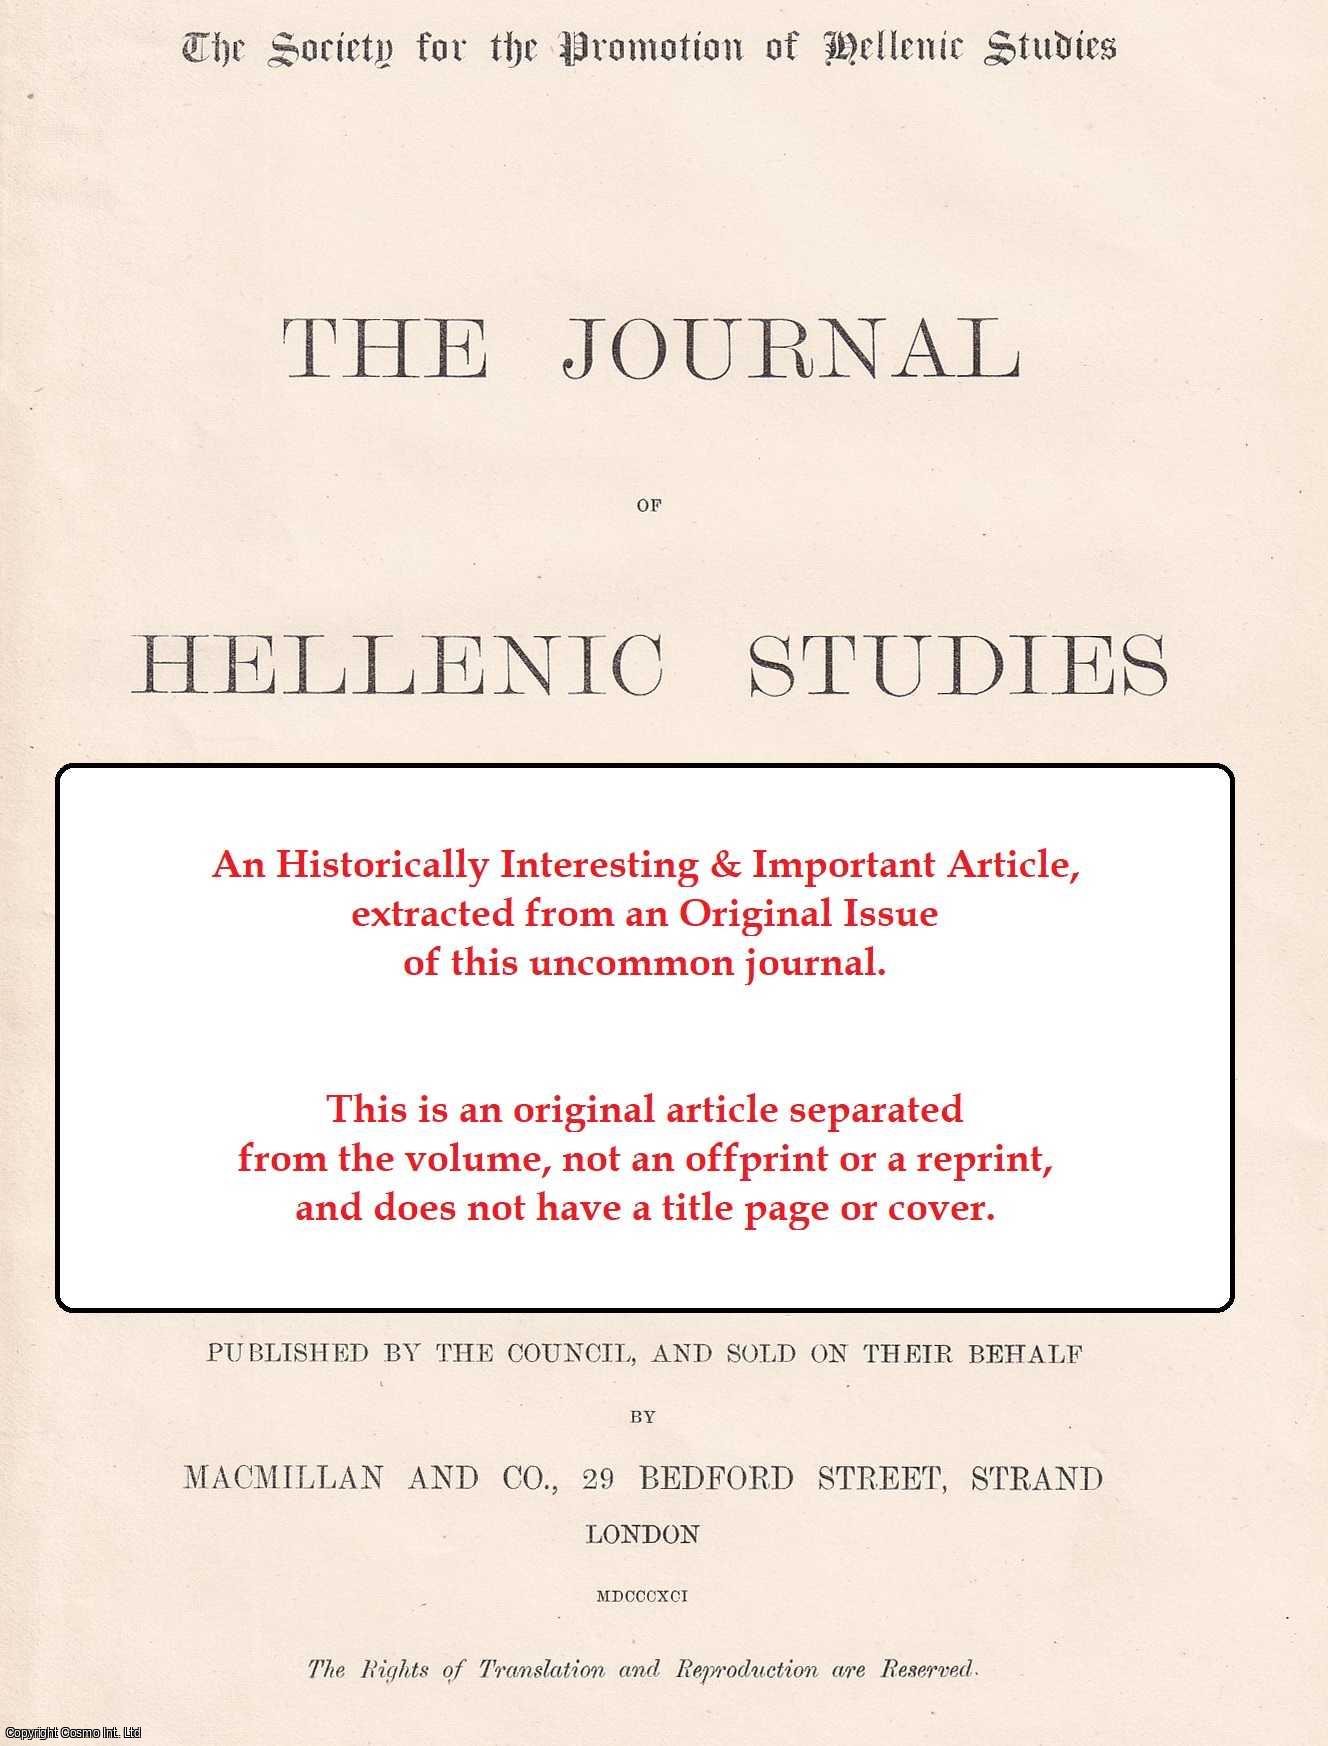 William Ridgeway - Metrological Notes: Had the People of Pre-Historic Mycenae a Weight Standard? An uncommon original article from the journal of Hellenic studies, 1889.